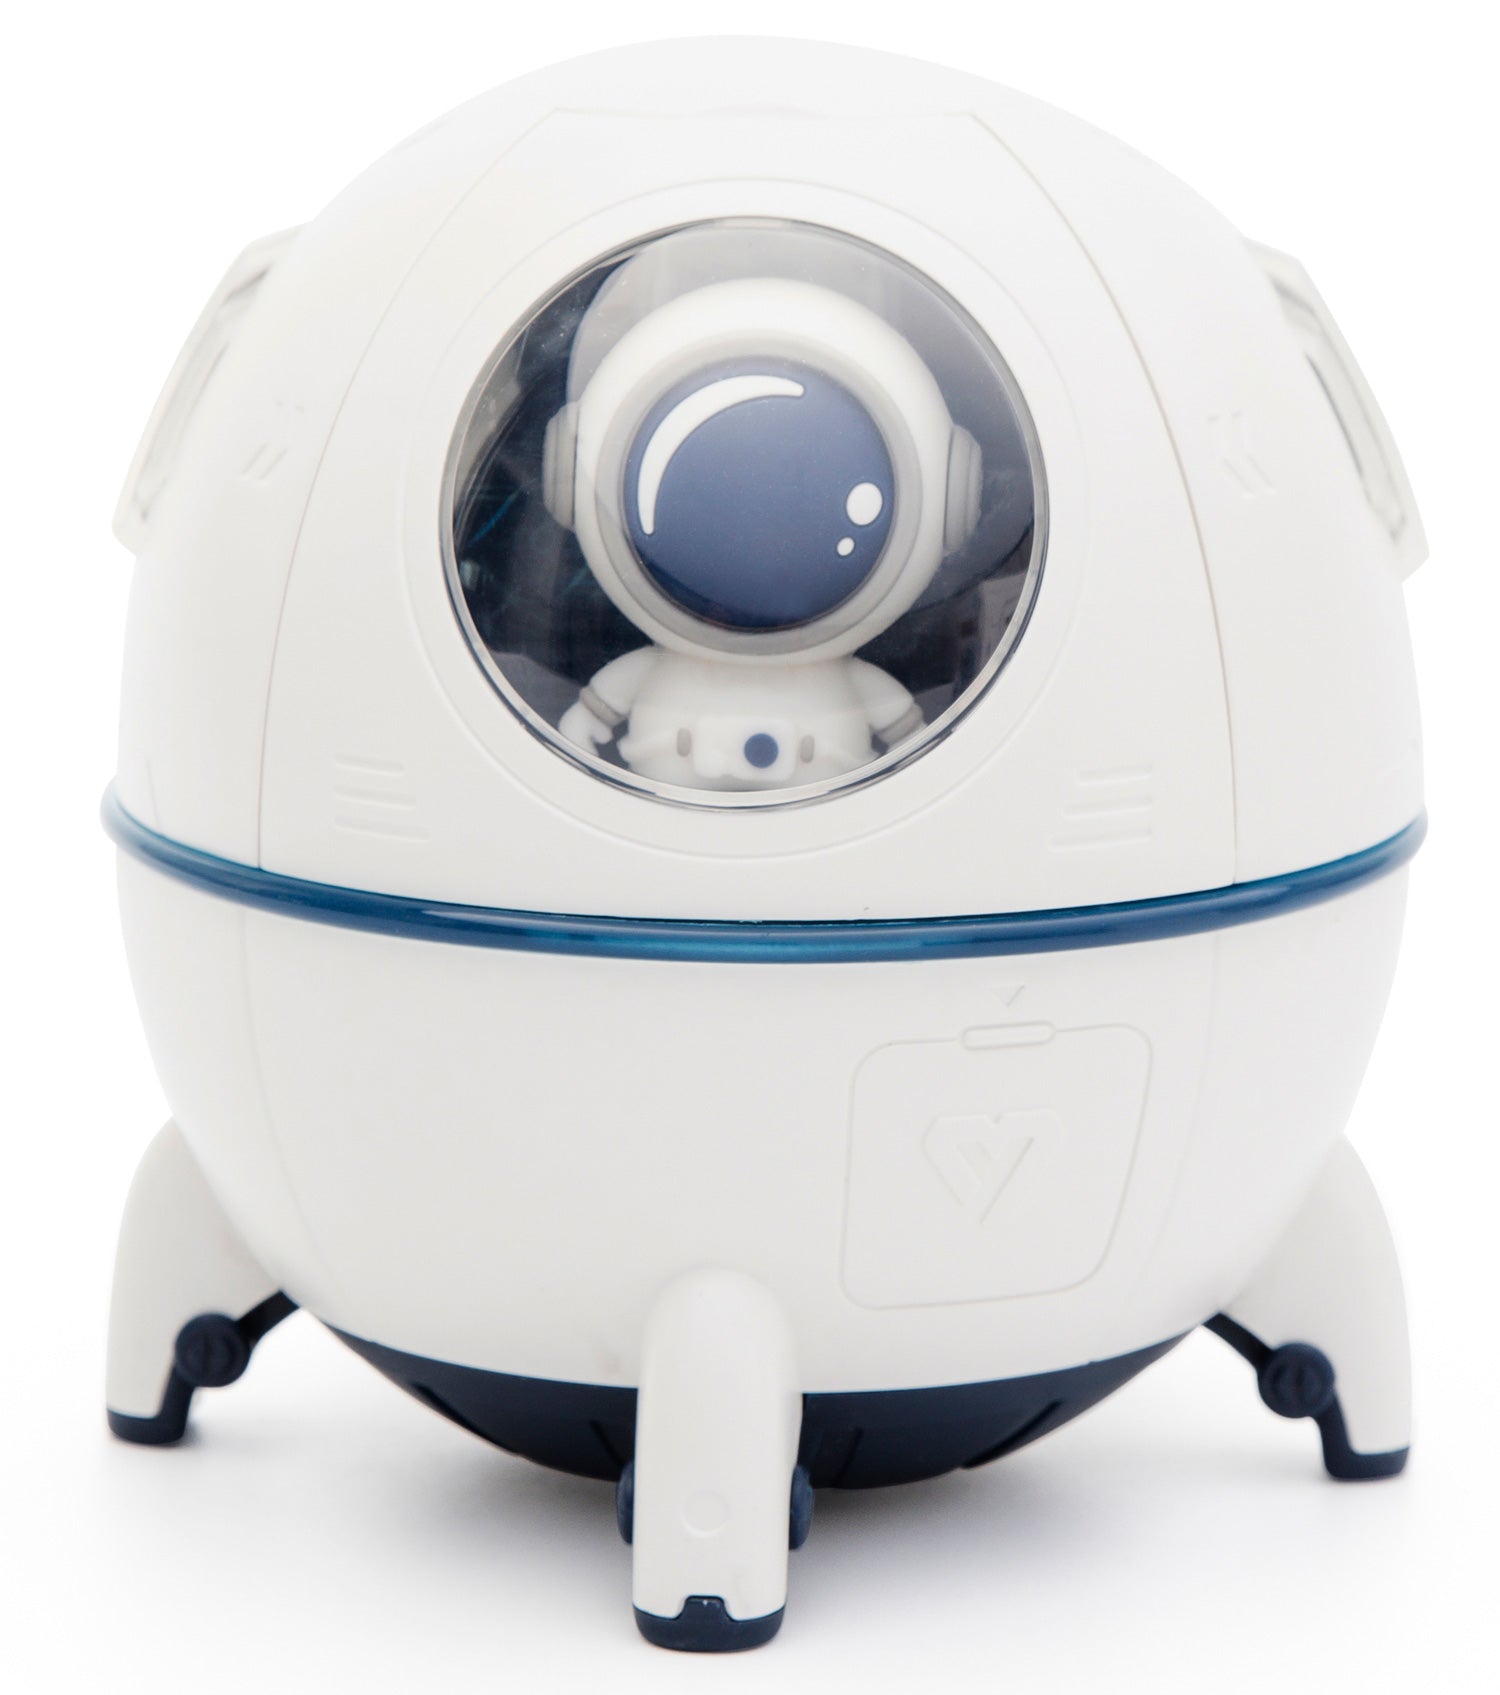 Spaceship Explorer Child's Essential Oil Diffuser, Humidifier and Night Light